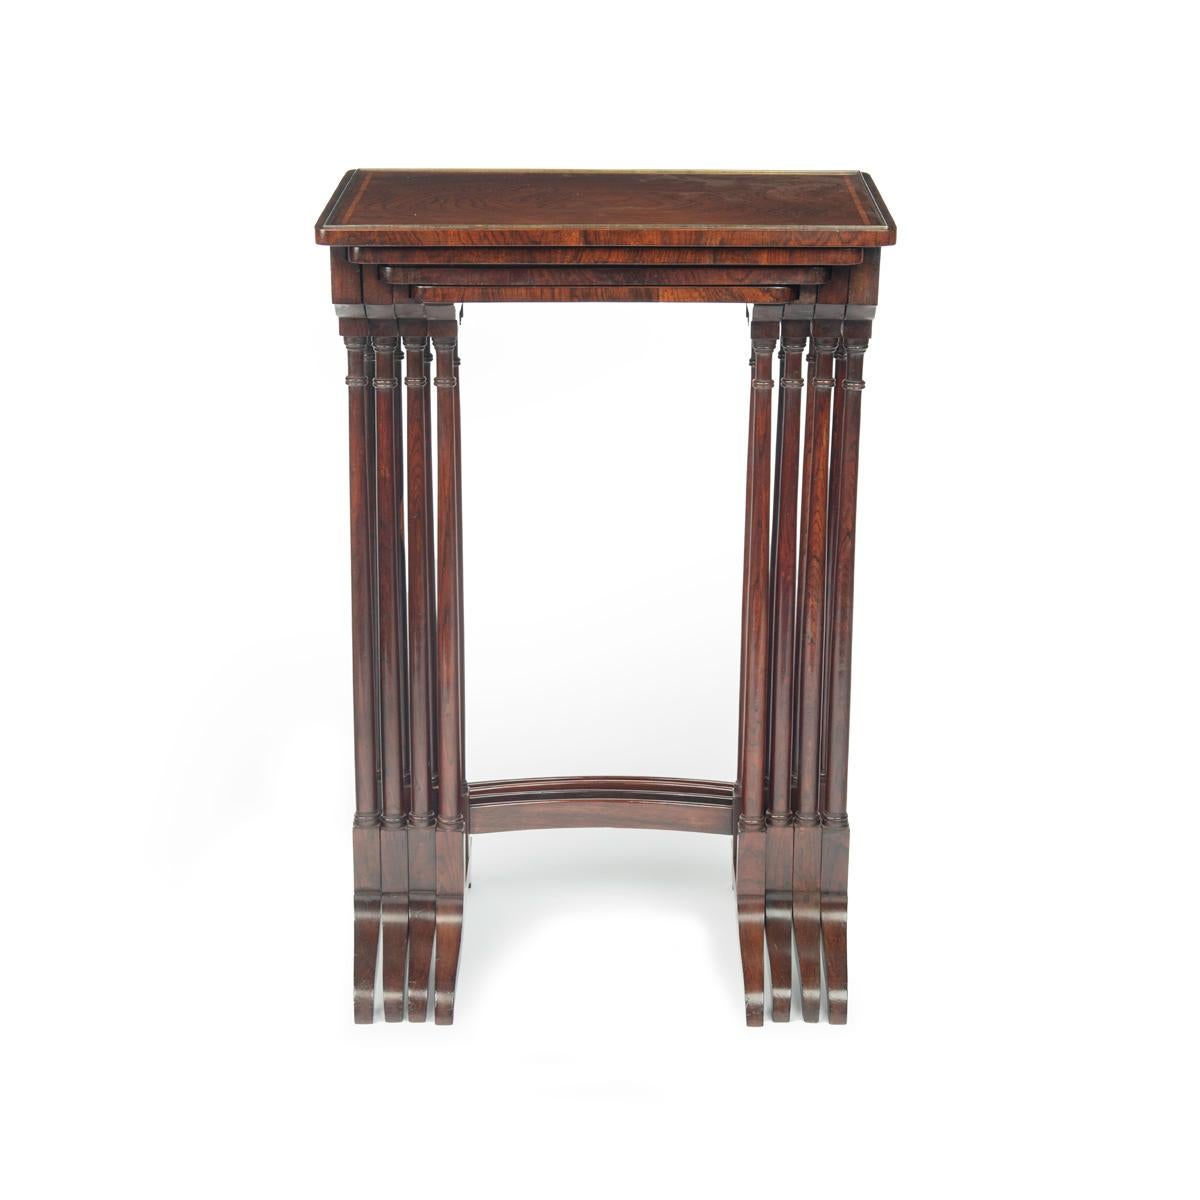 A set of Regency rosewood Quartetto tables, attributed to Gillows, each of rectangular form with well figured veneers, brass cock-beading and satinwood stringing, the solid rosewood end supports comprising paired columns.  English, circa